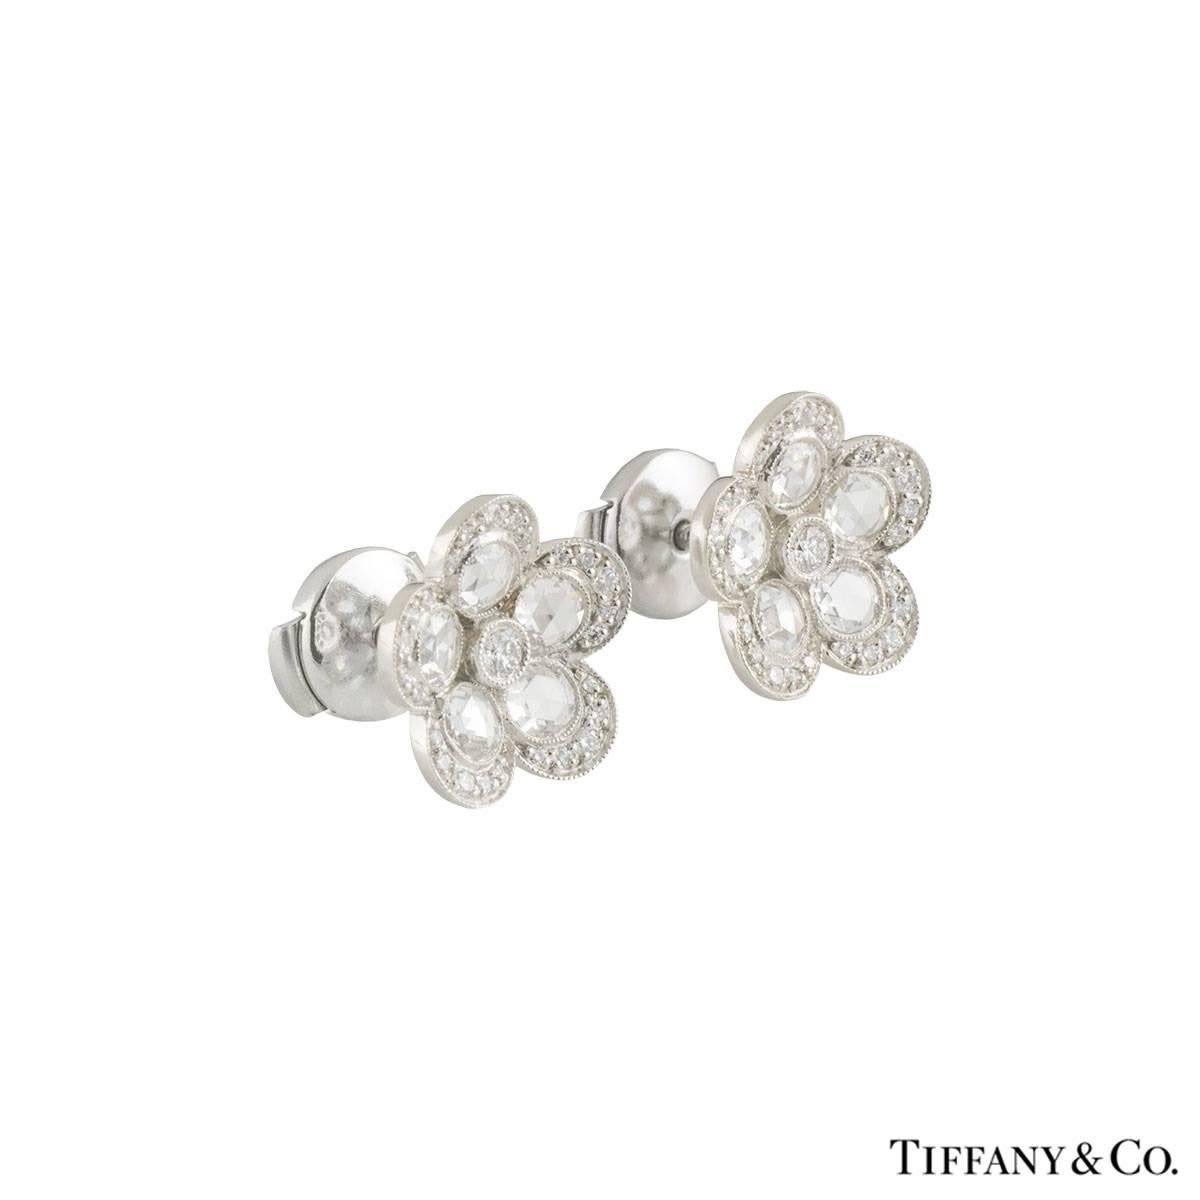 A beautiful pair of platinum diamond Tiffany earrings from the Garden Flower collection. The earrings each comprise of a round brilliant cut diamond as the stigma, 5 round rose cut diamonds as the petals and round brilliant cut diamonds around the